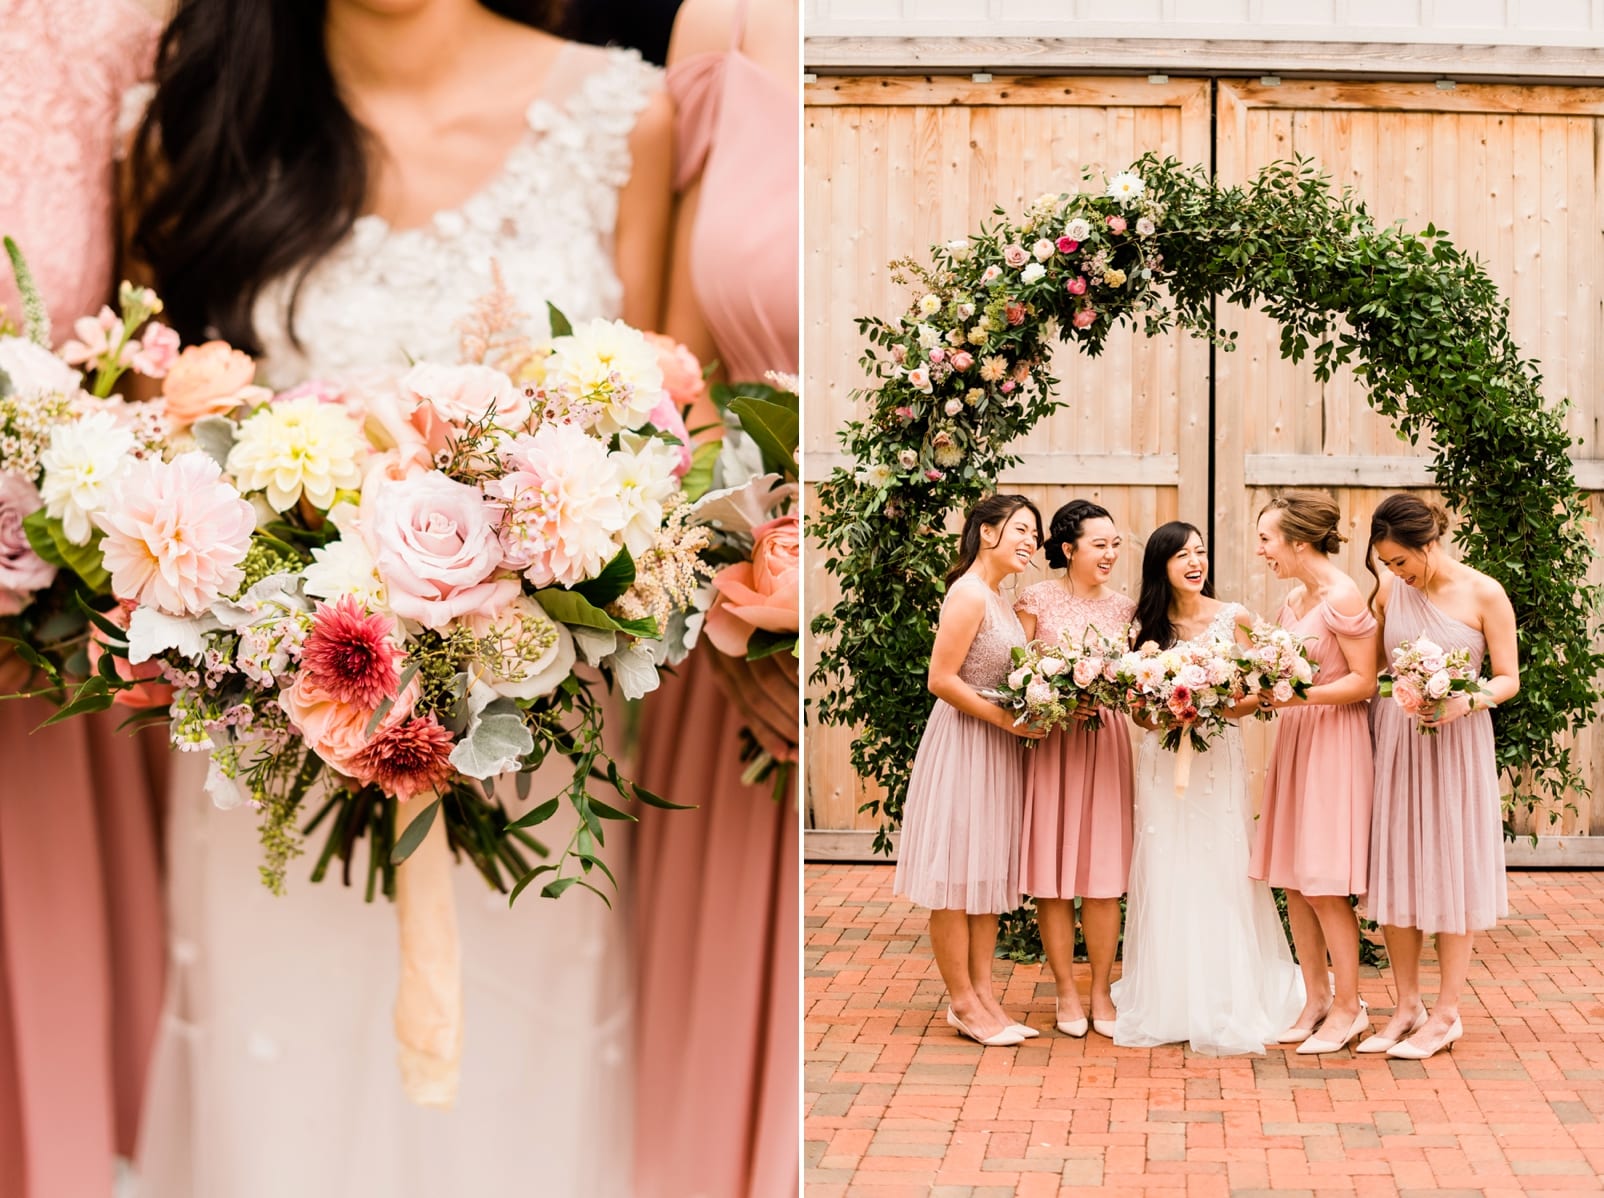 Tulle & Chantilly light pink, knee length bridesmaid dresses in front of large circle wreath floral installation photo